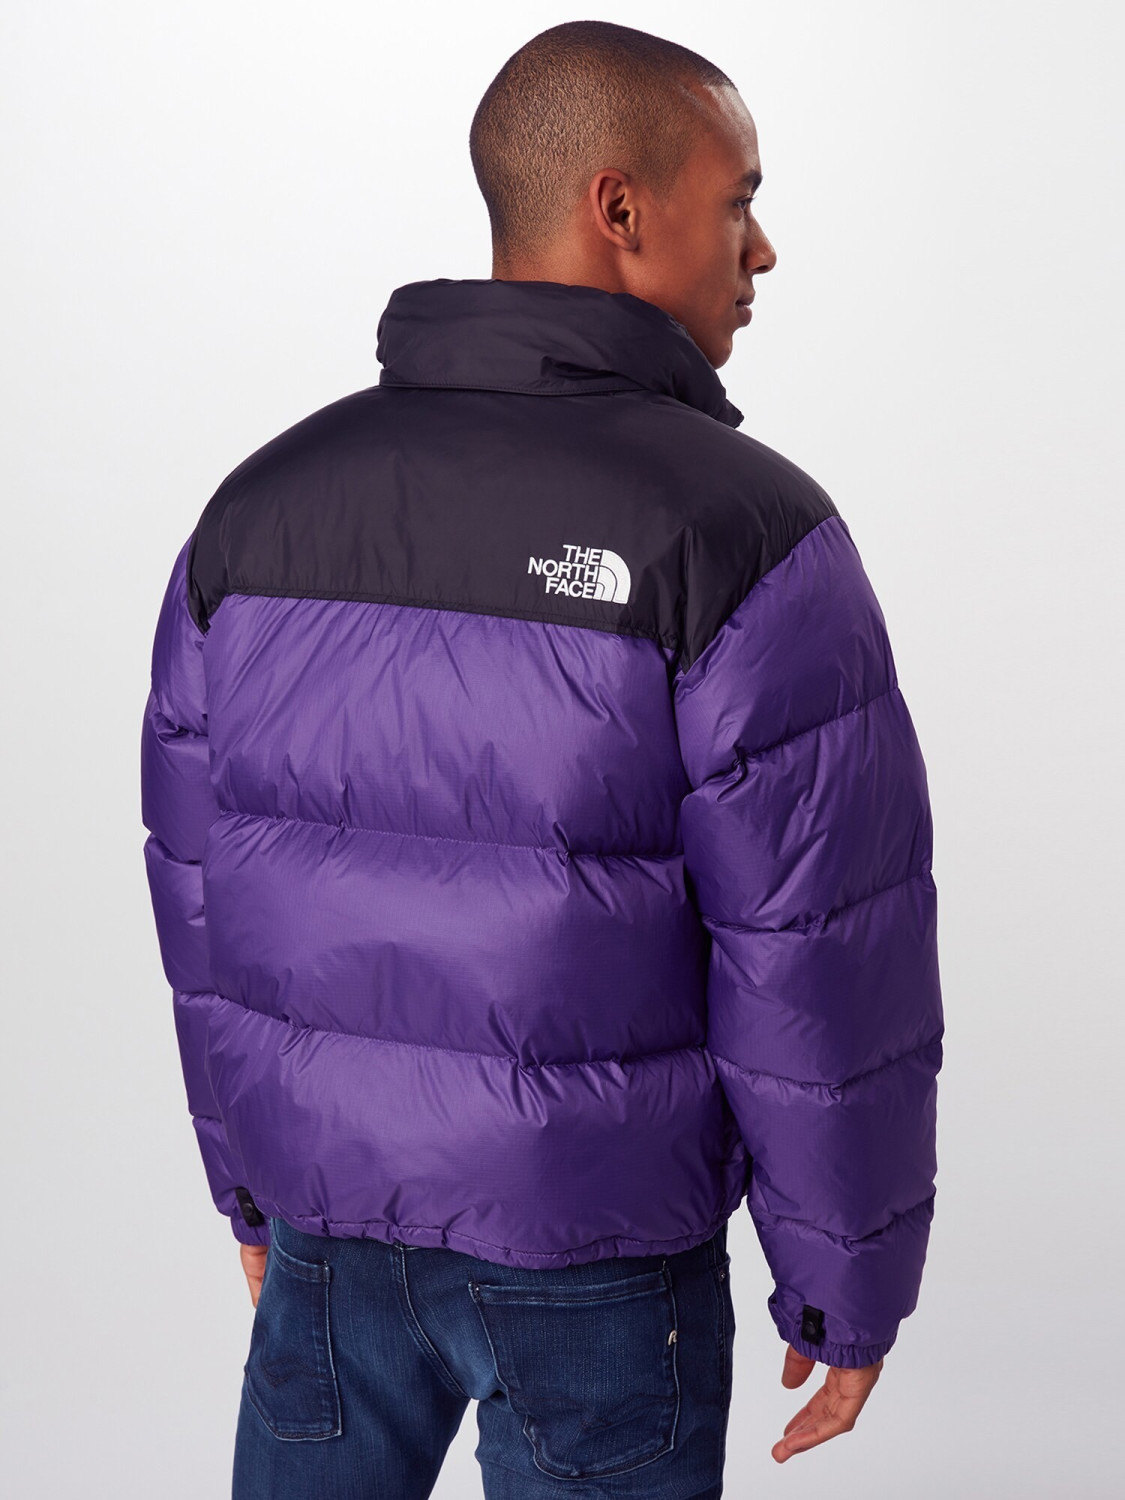 Buy The North Face 1996 Retro Nuptse Jacket purple from £315.00 (Today ...